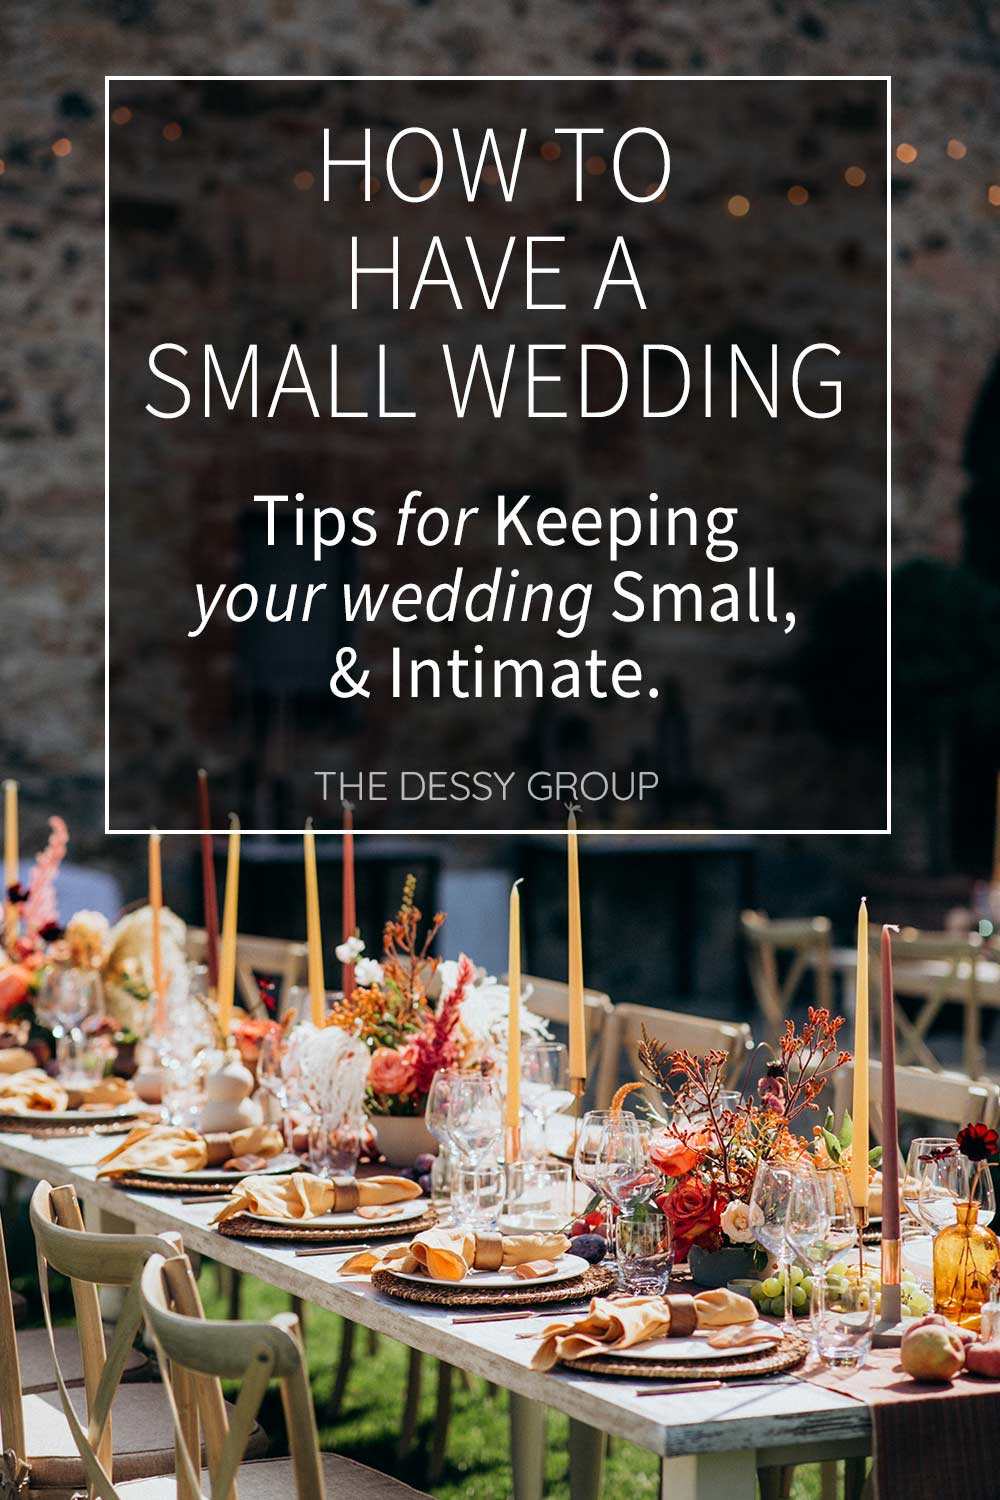 Not keen on a big, expensive wedding? We don't blame you one bit. Learn how to plan a small wedding that keeps the guest count low and the wow factor high!